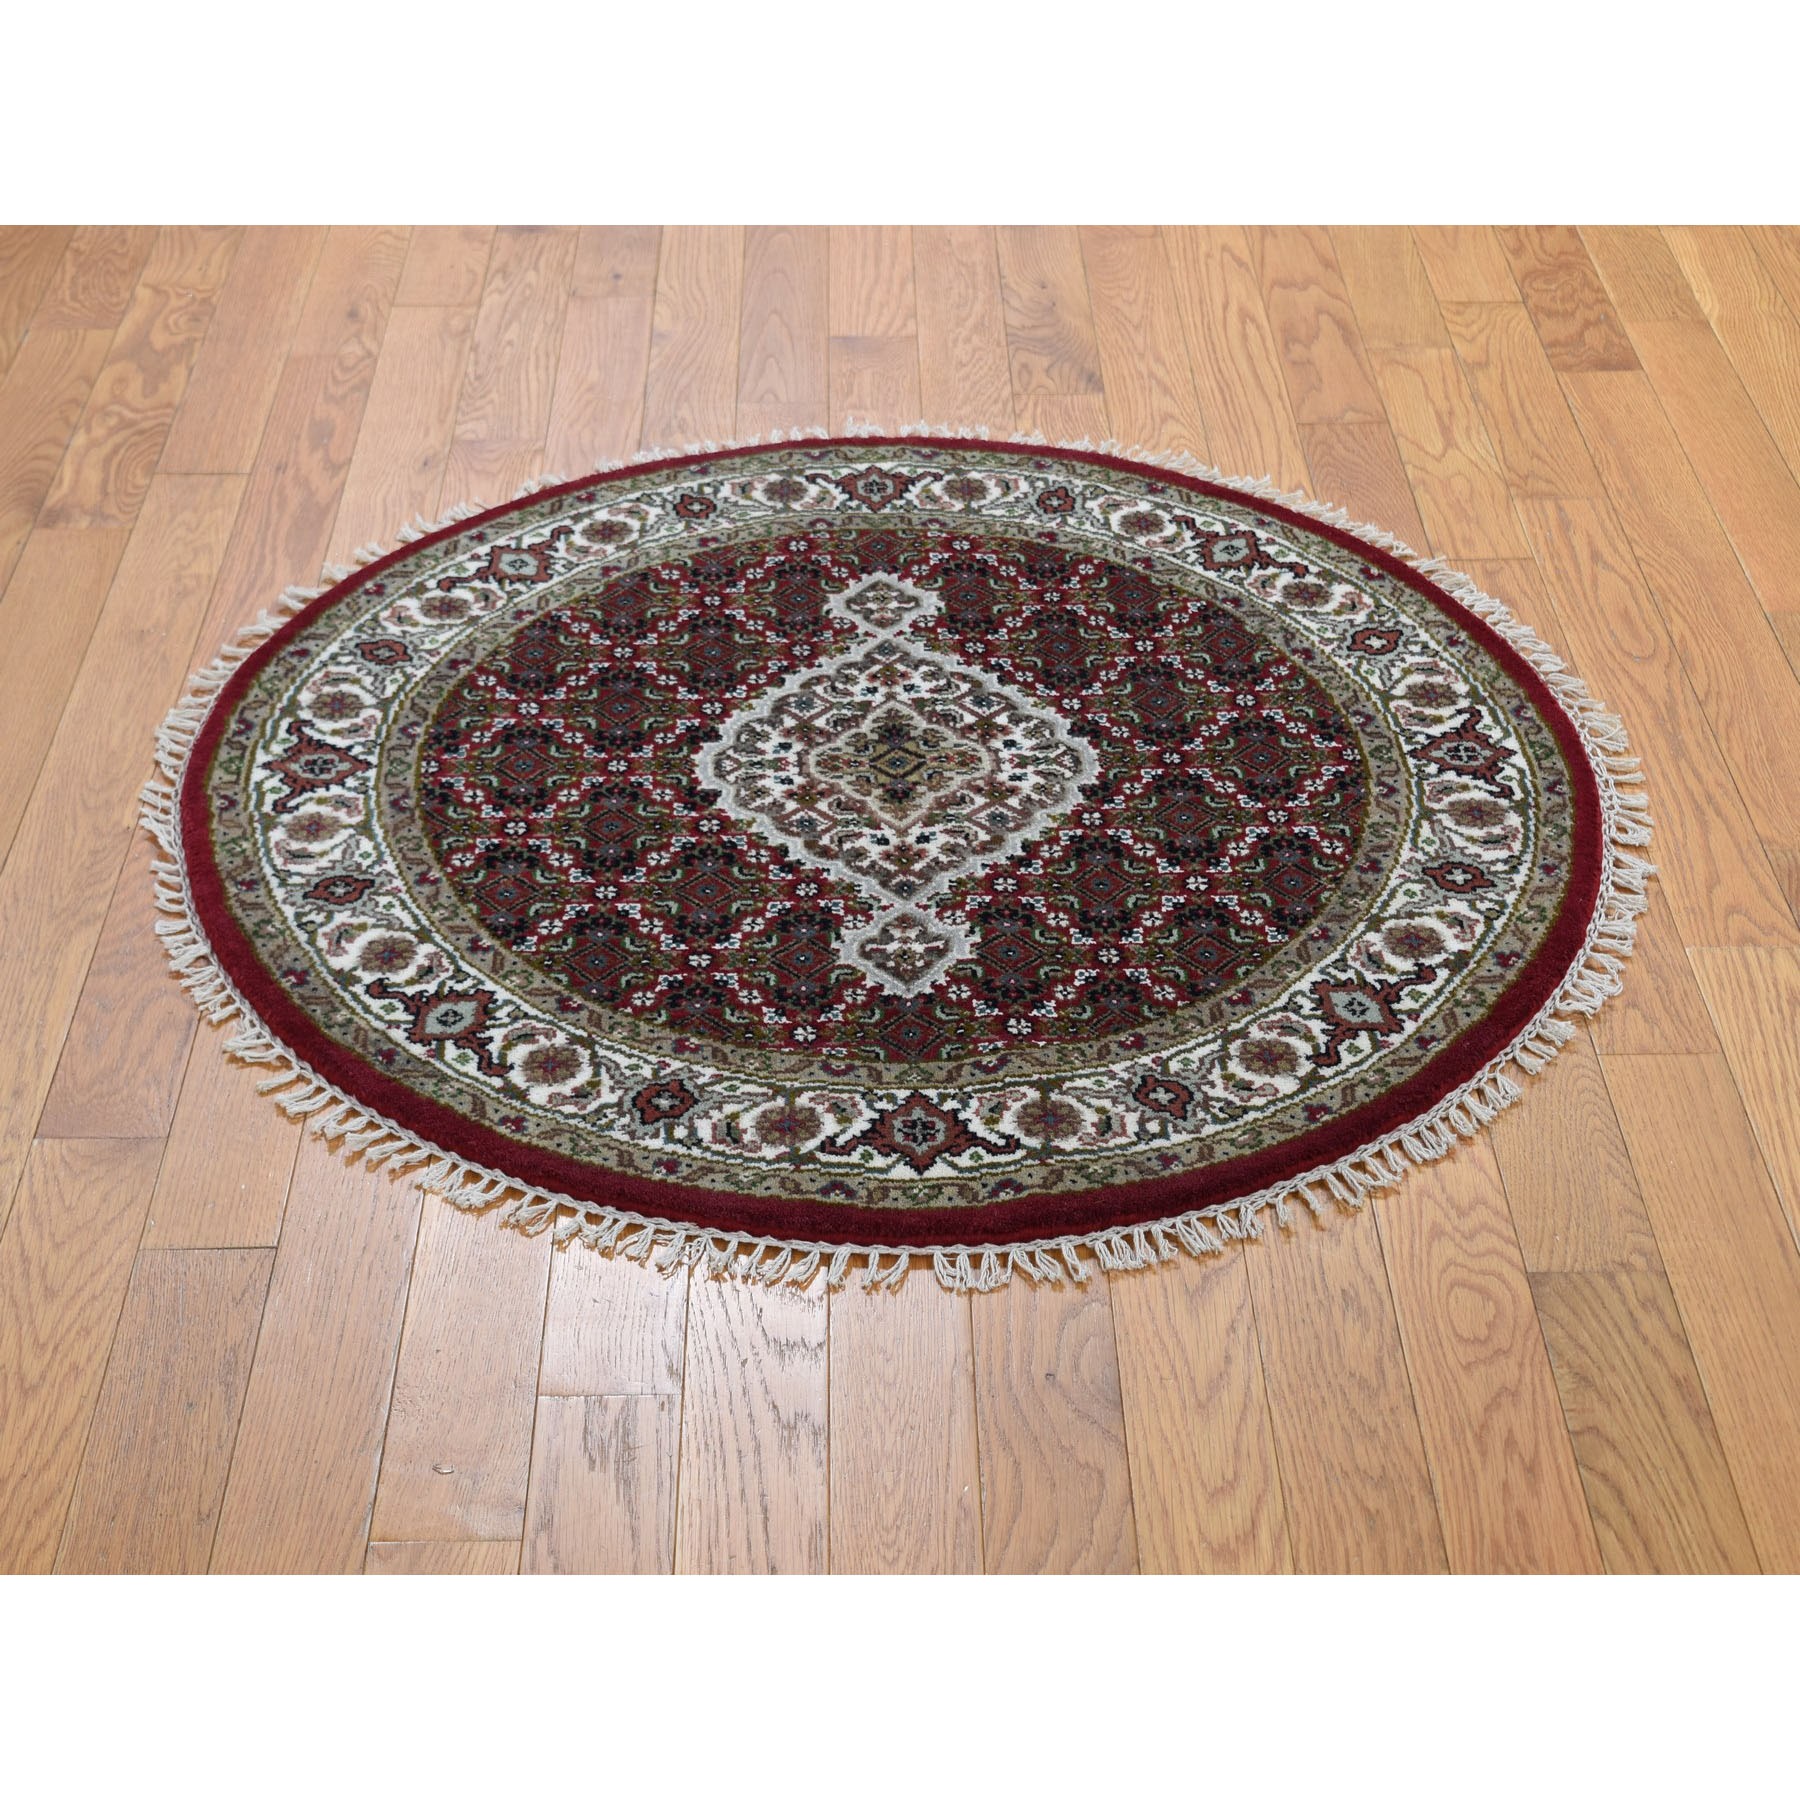 3-4 x3-4  Round Red Tabriz Mahi Wool and Silk Hand Knotted Oriental Rug 